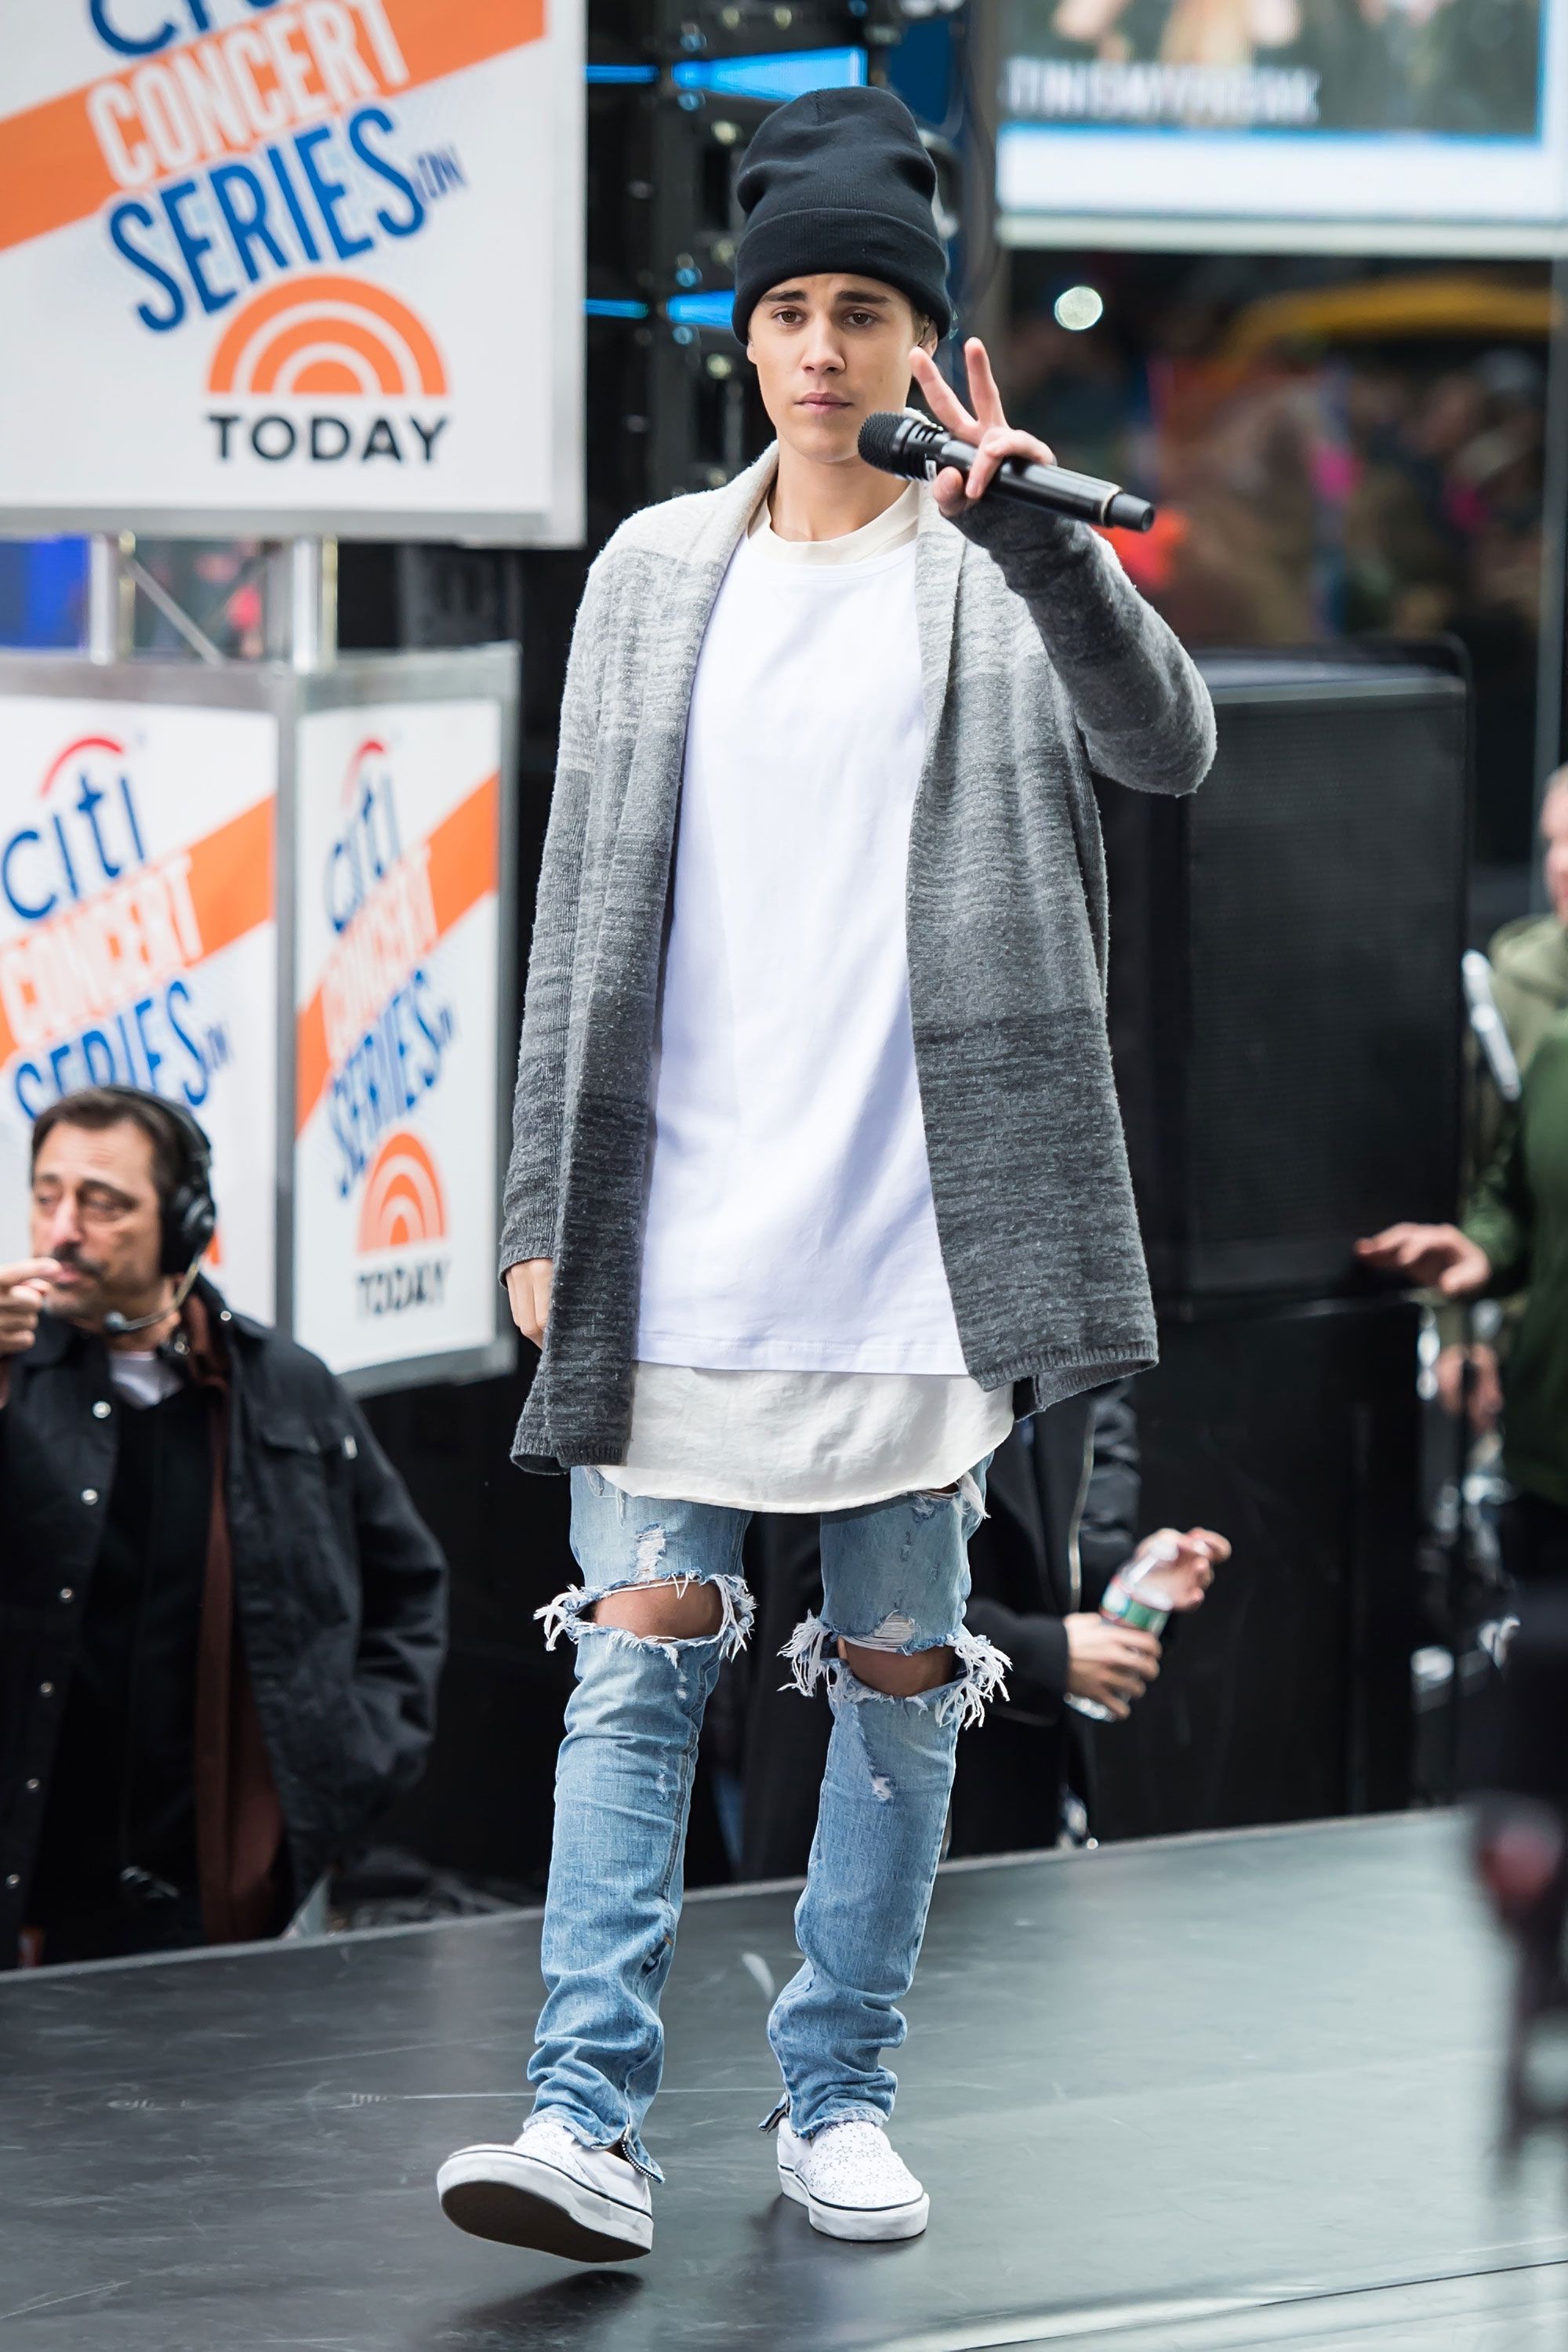 Justin Bieber's Style Does a 180 and We Have His Girlfriends to Thank